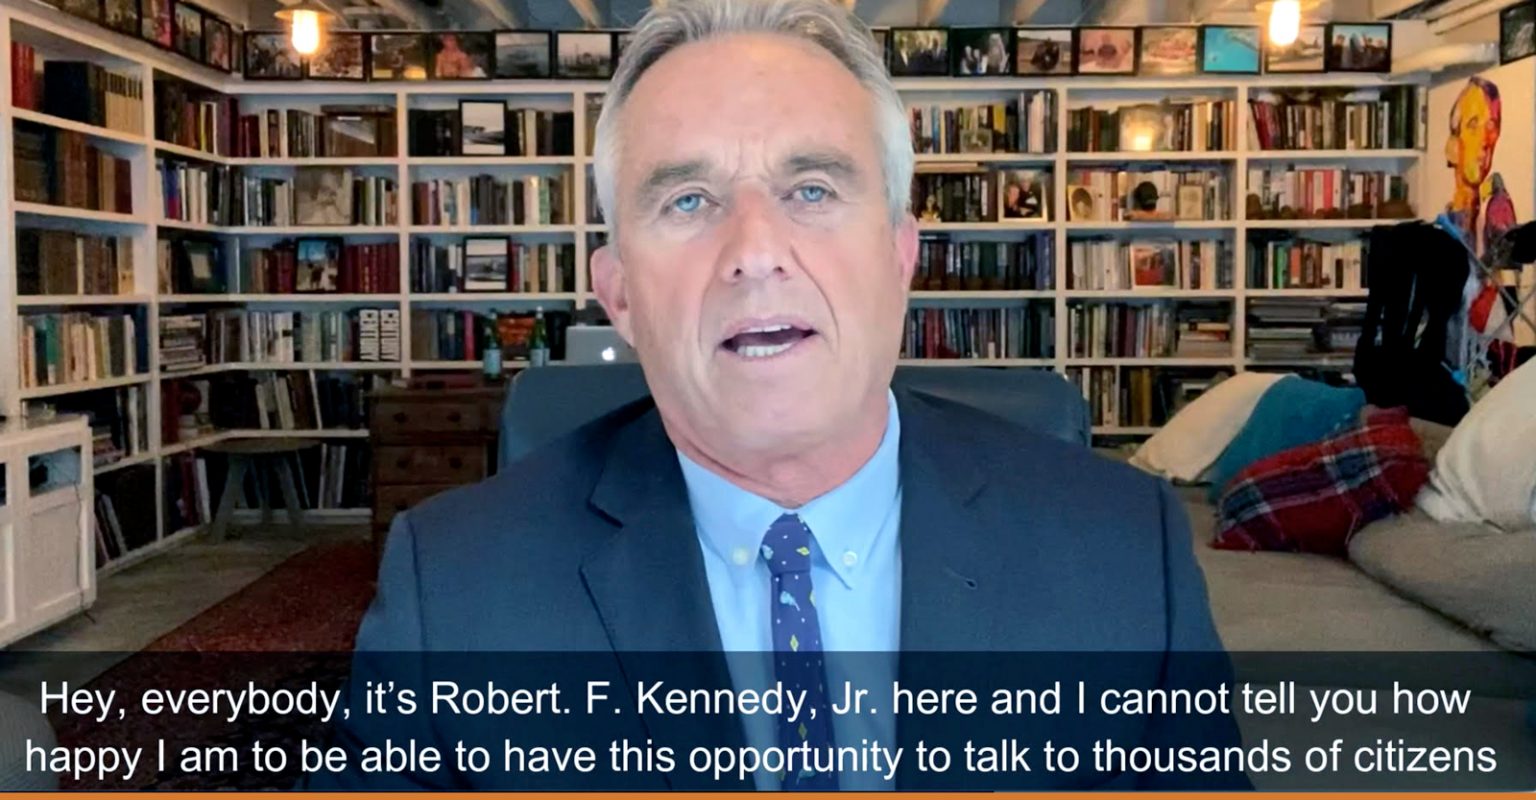 An International Message of Hope for Humanity From RFK, Jr.